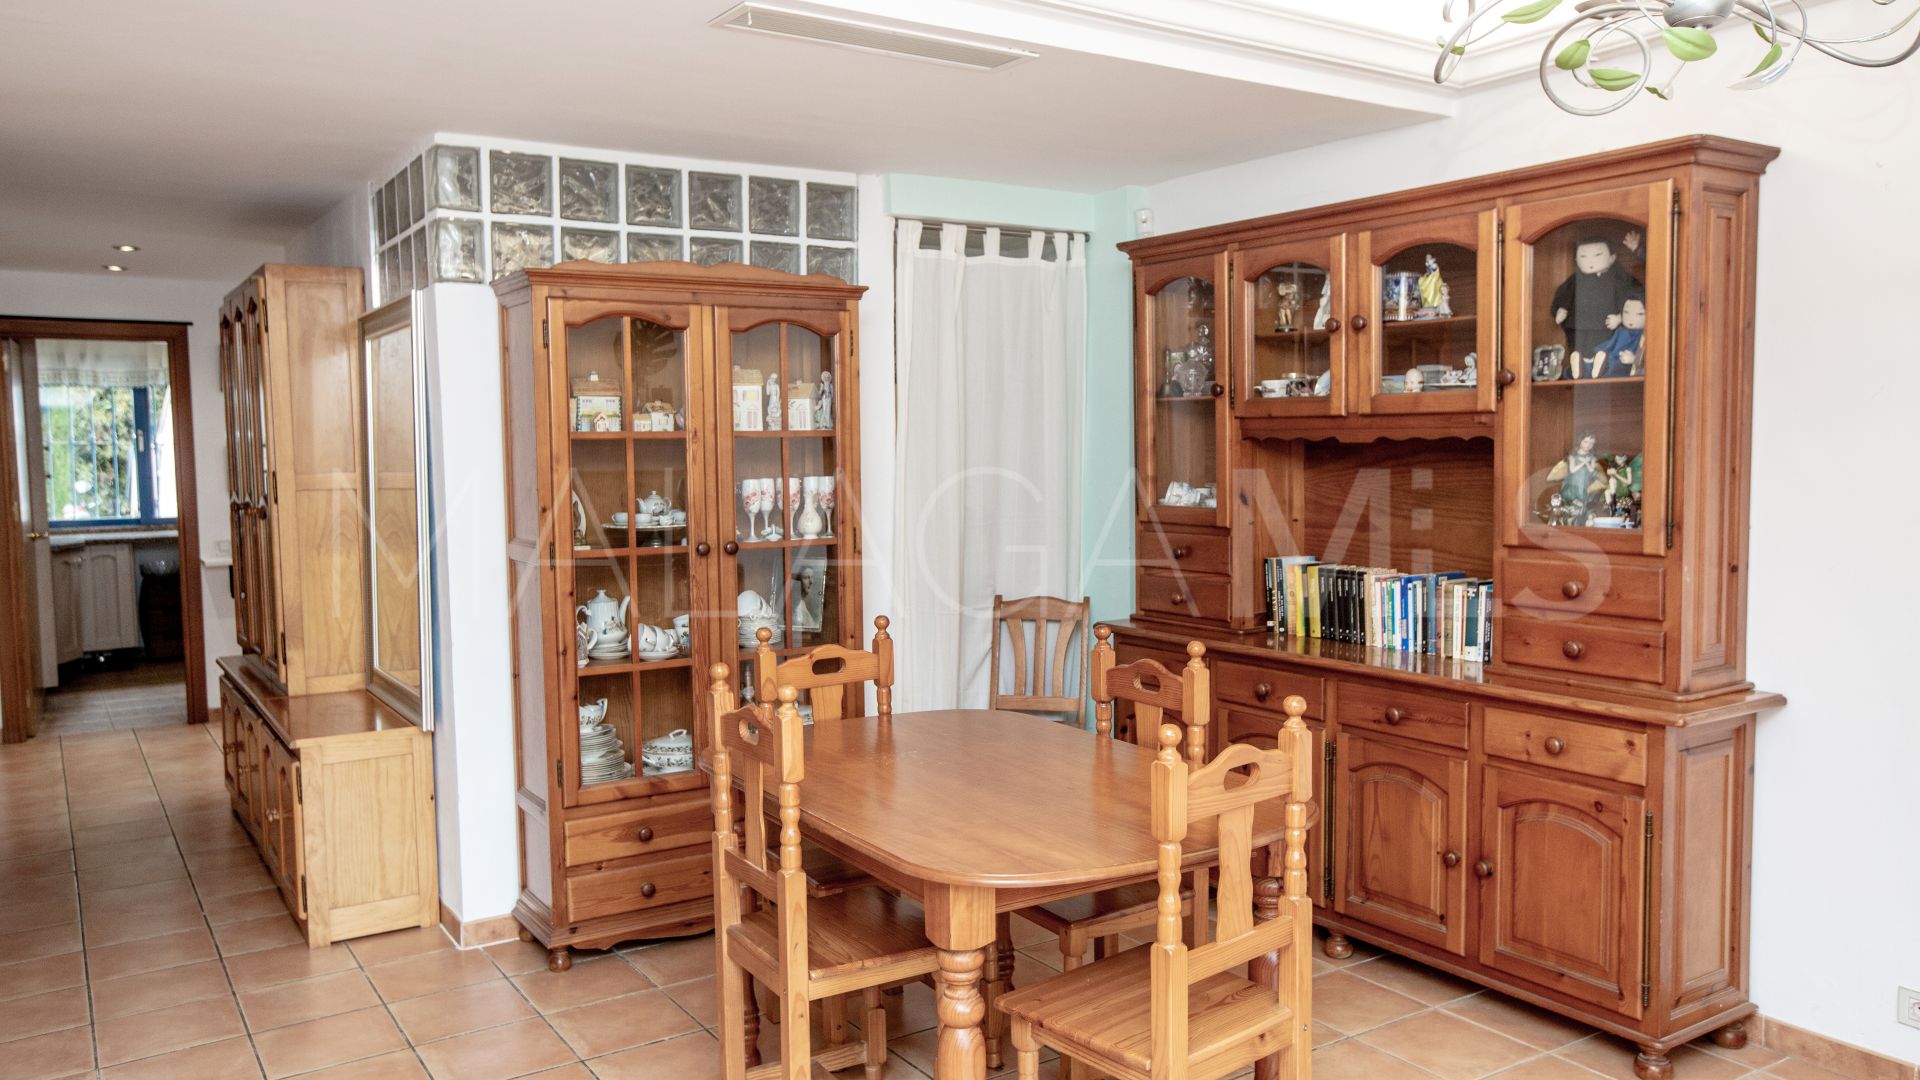 Semi detached house with 5 bedrooms for sale in Haza del Conde